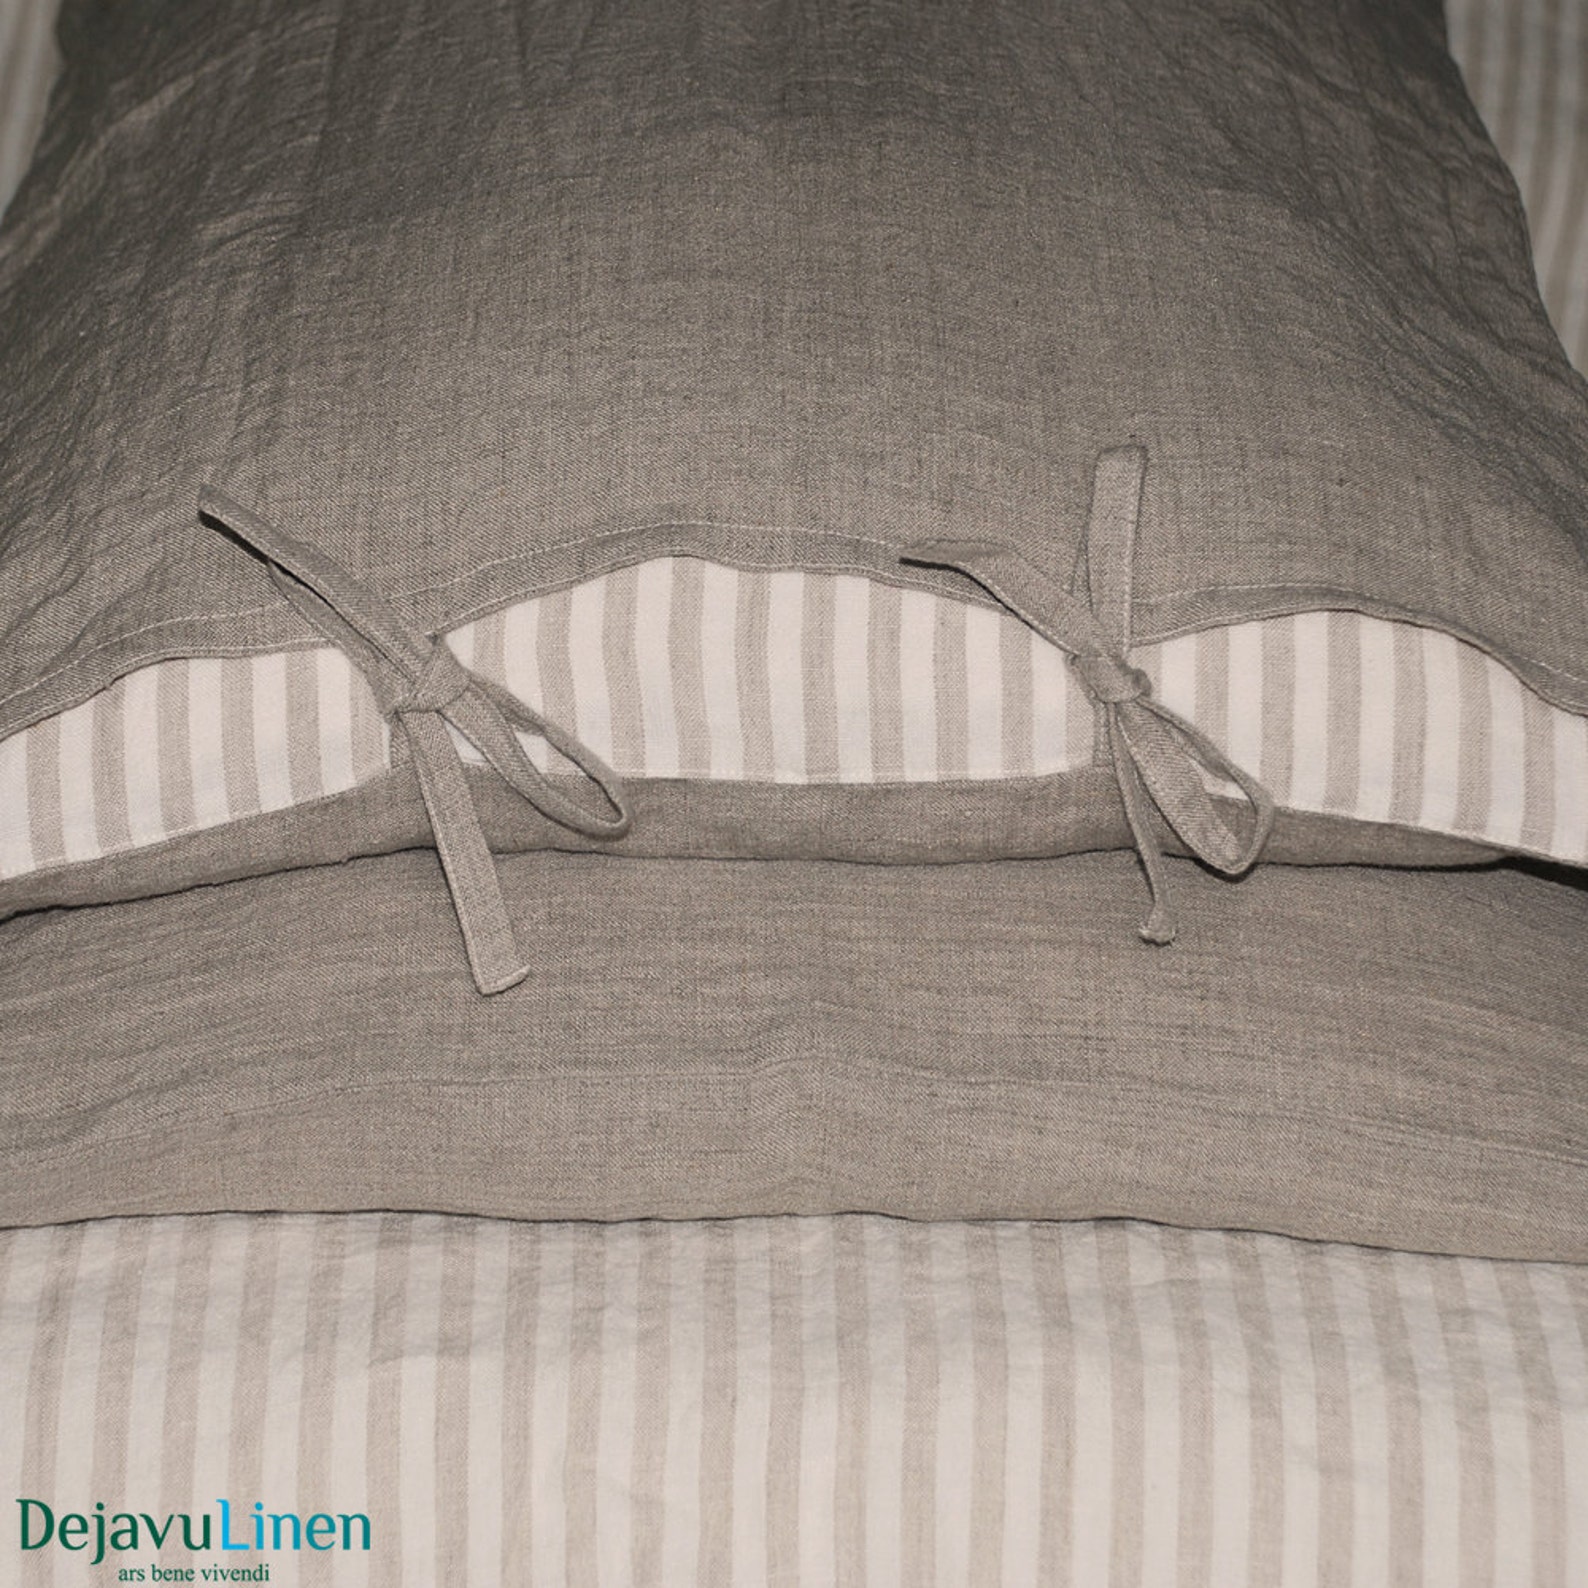 2 Linen Pillowcases With Ties Stone Washed Linen Pillow Sham - Etsy